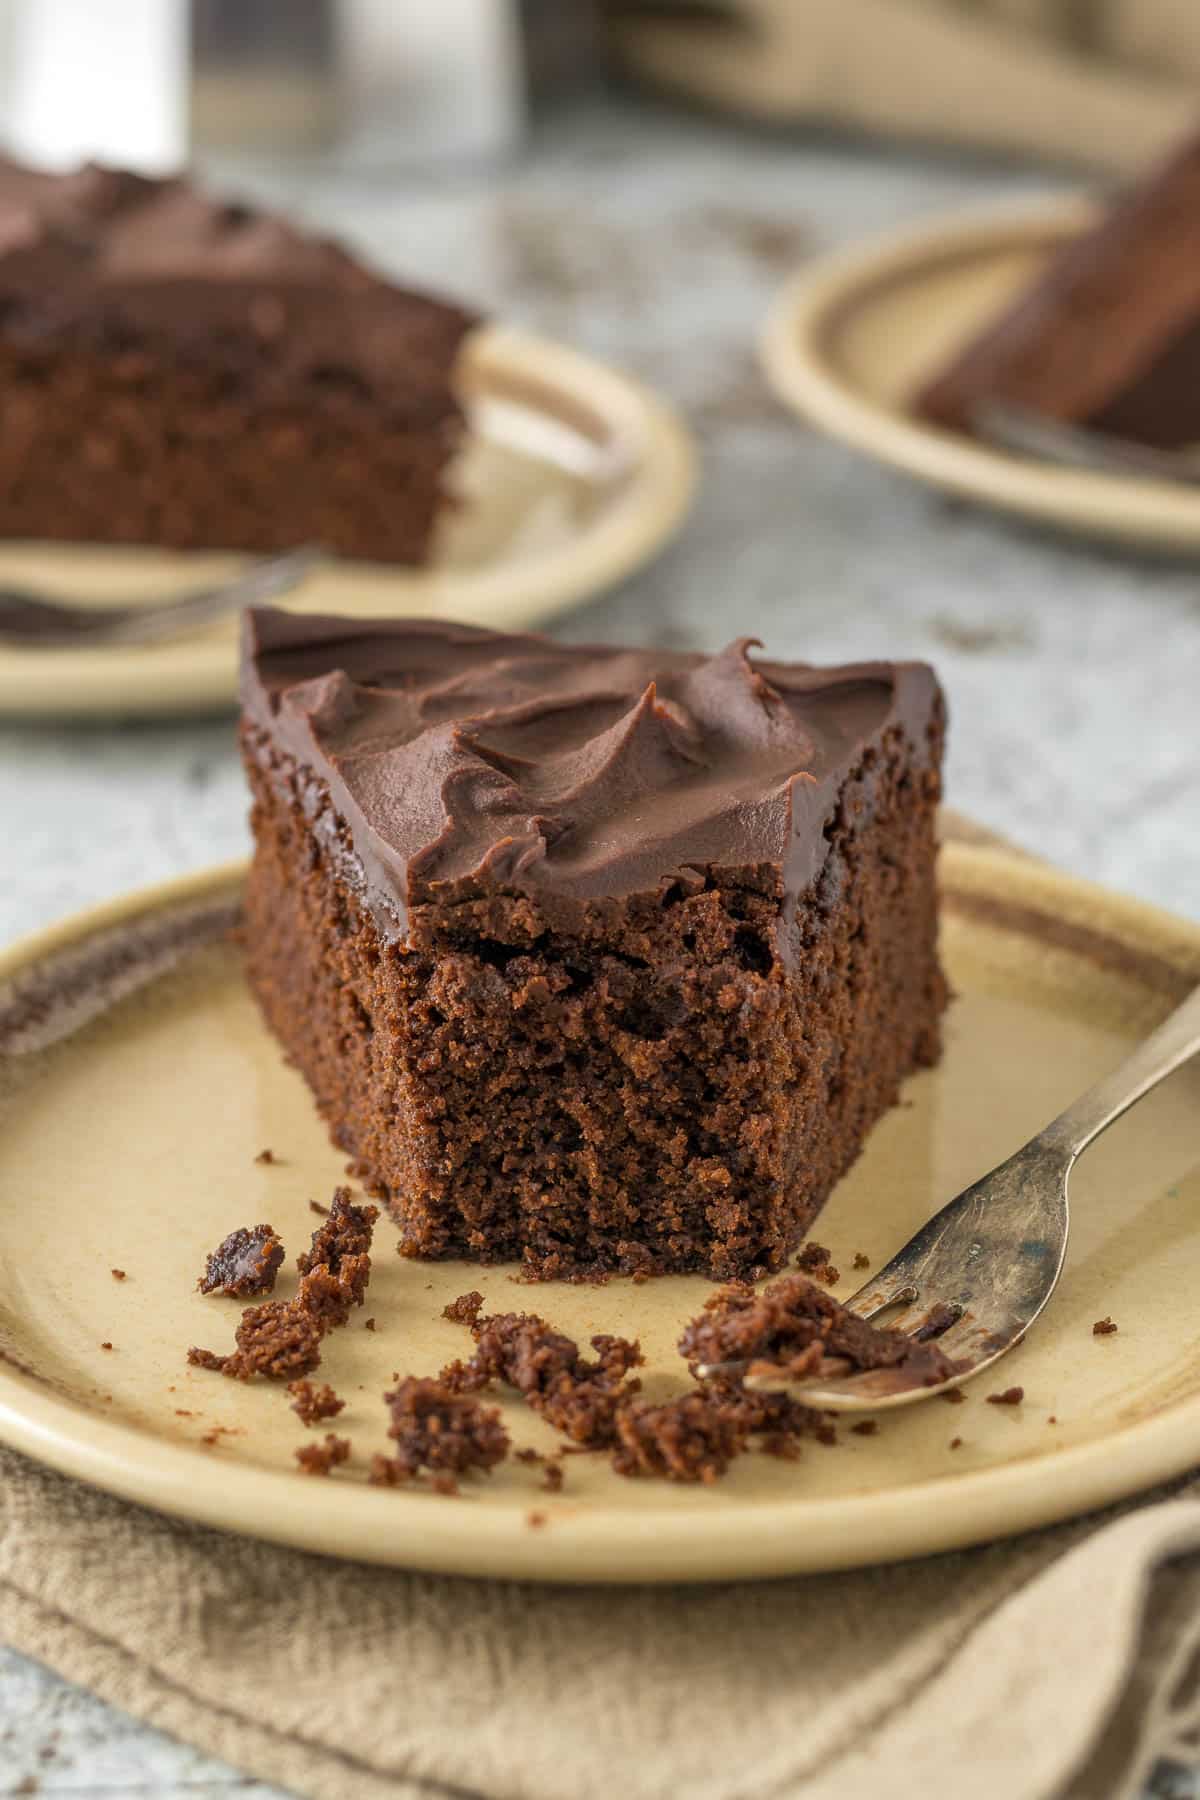 A slice of chocolate fudge cake on a plate with a cake fork.